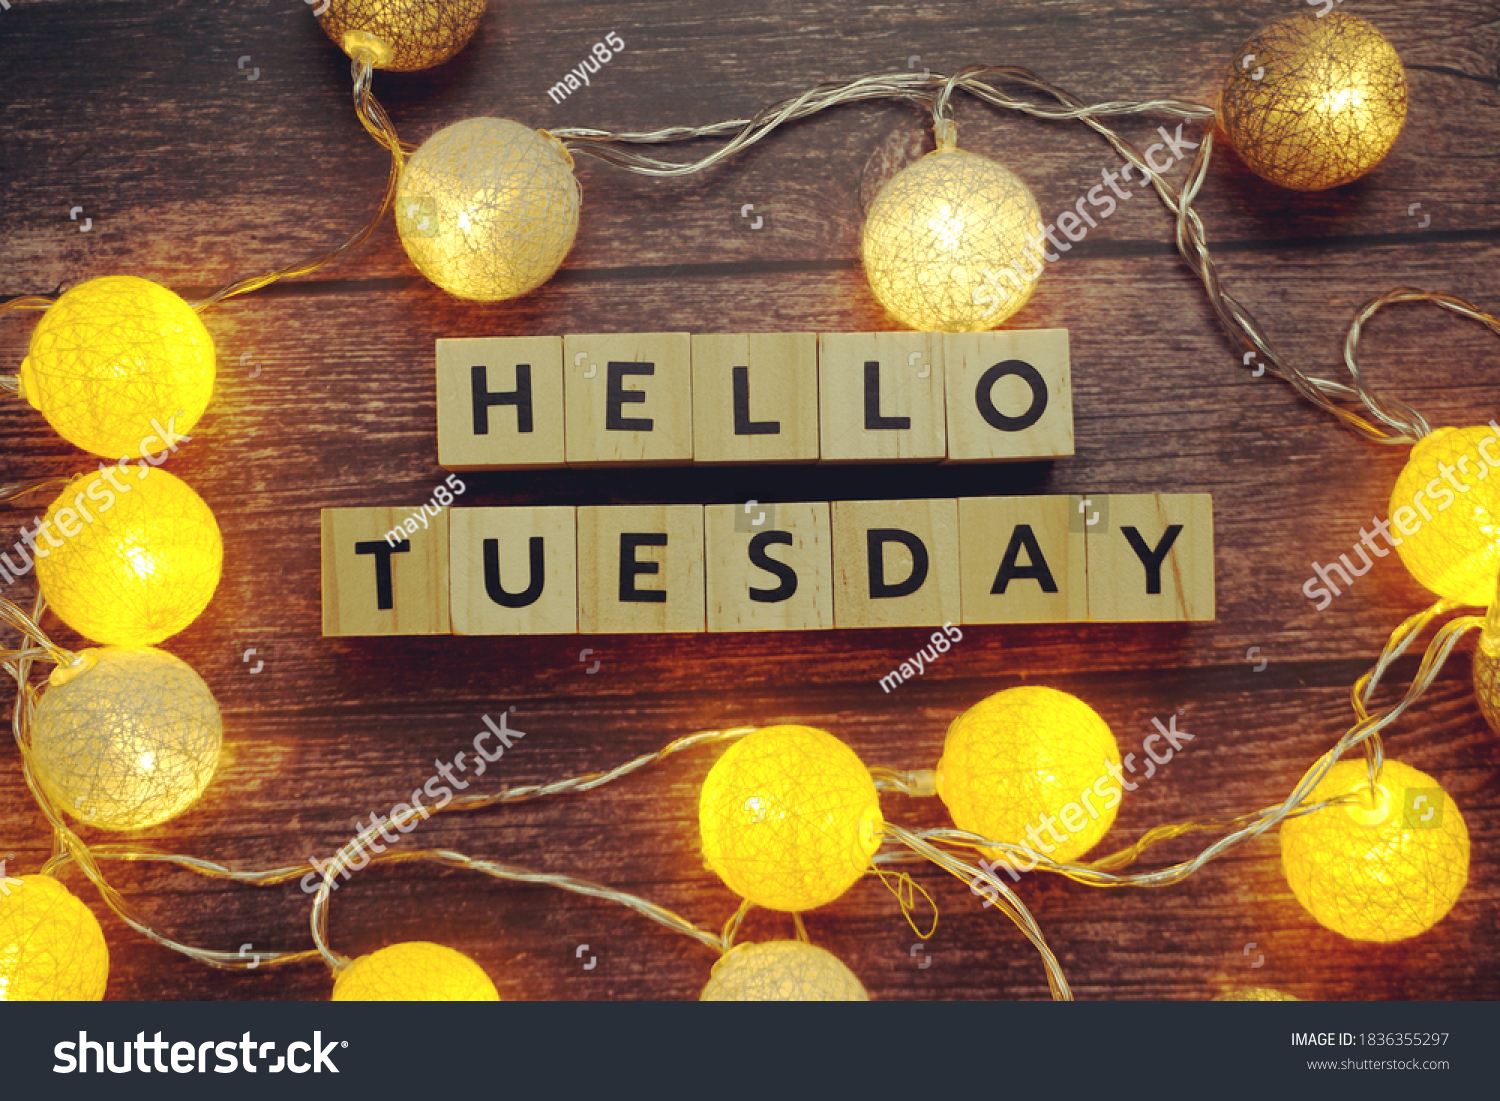 Hello Tuesday alphabet letter with LED cotton balls on wooden background #1836355297